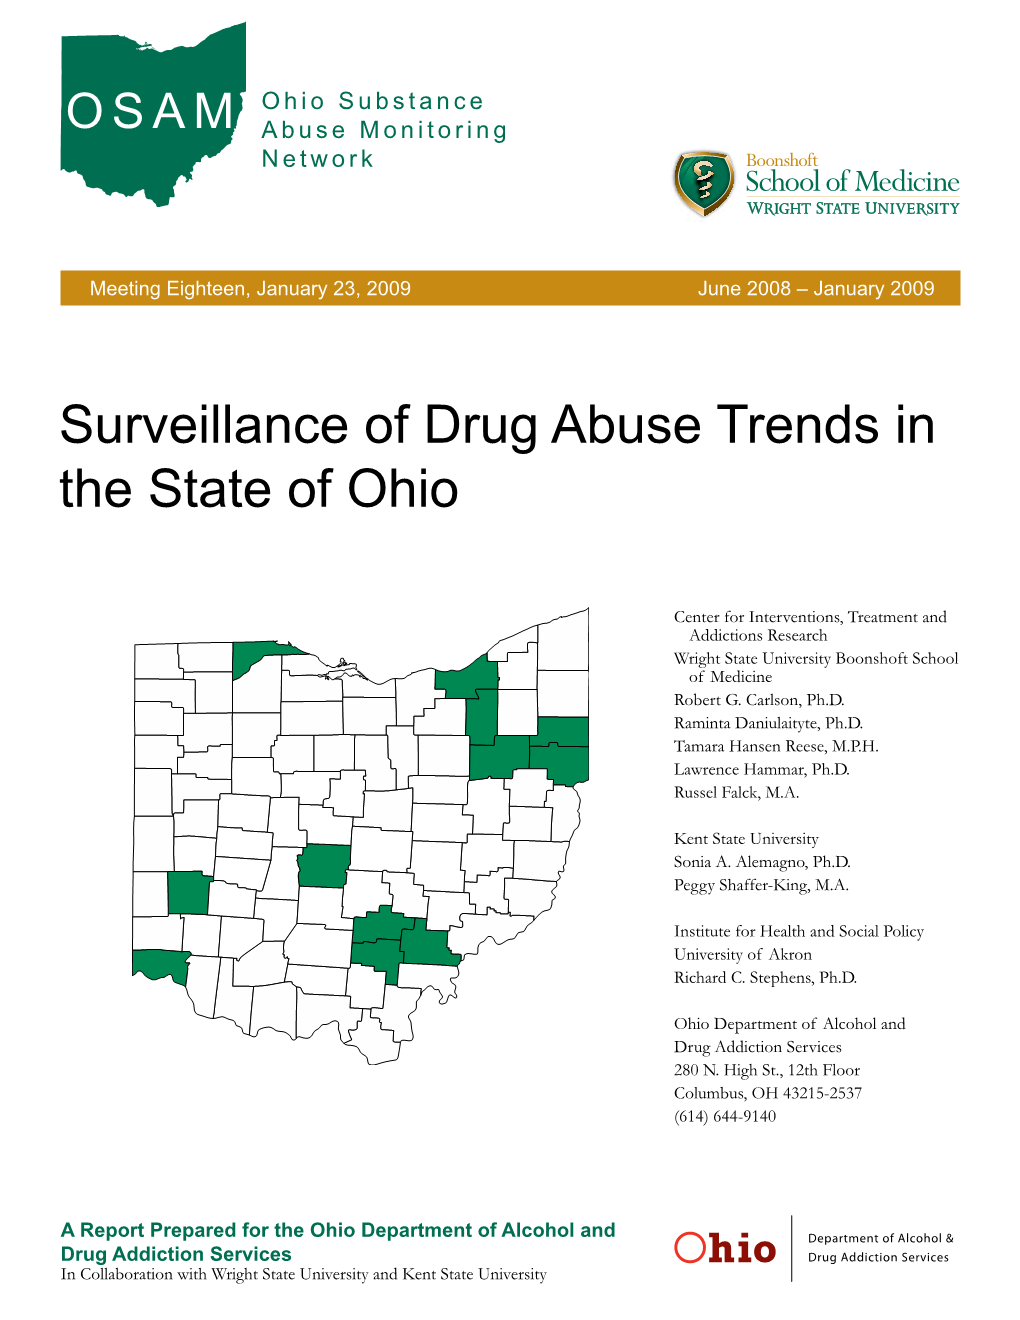 Surveillance of Drug Abuse Trends in the State of Ohio